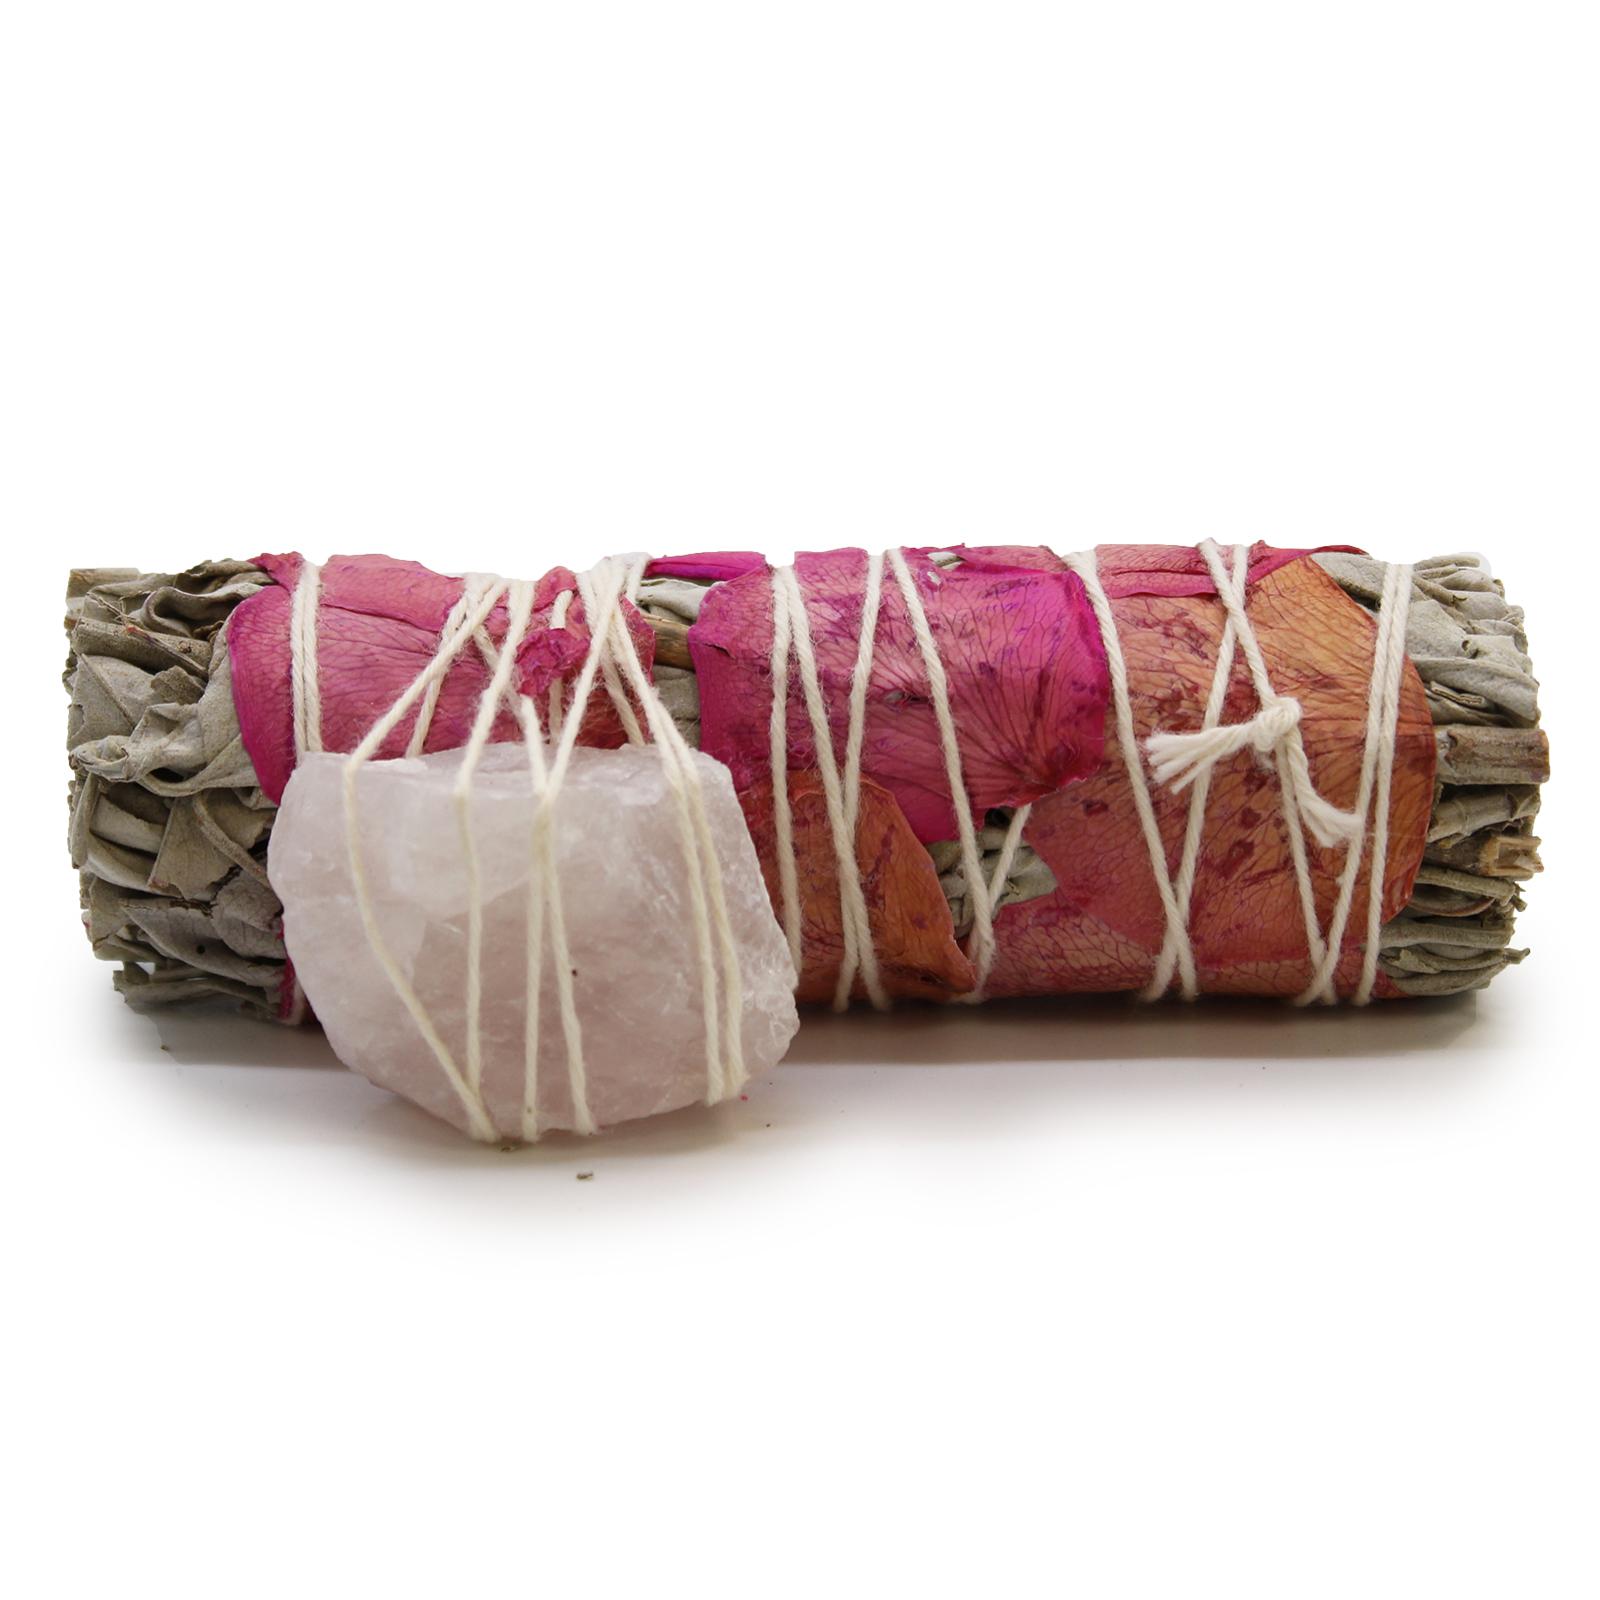 Smudge Stick - White Sage with Rose petals and crystal